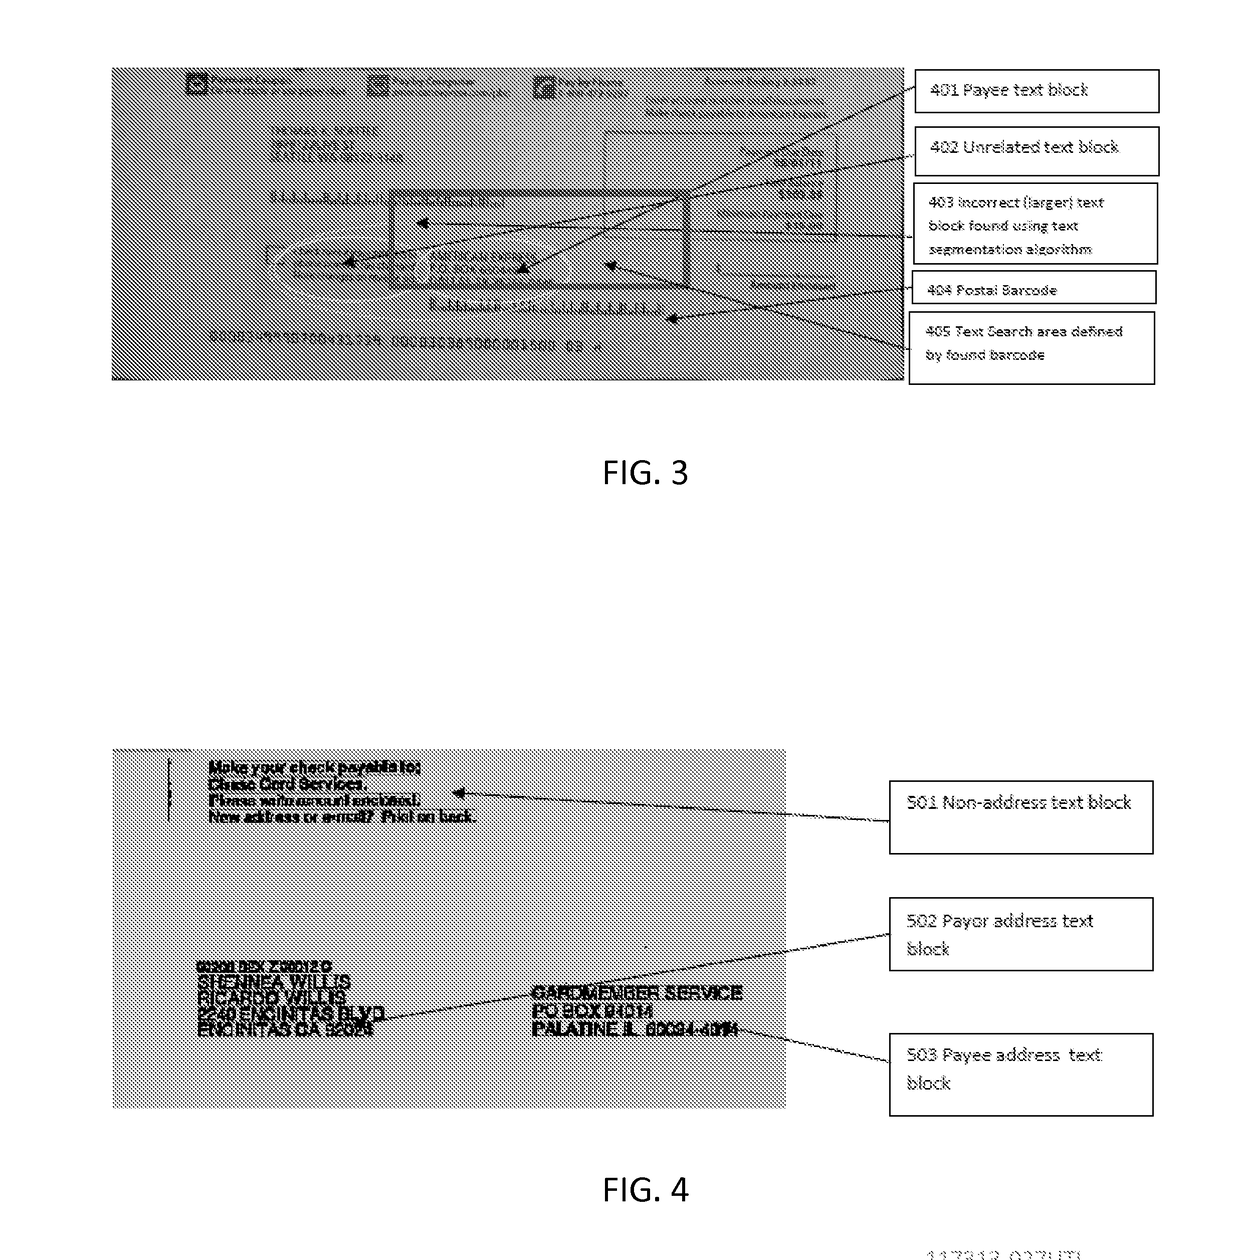 Systems and methods for capturing critical fields from a mobile image of a credit card bill